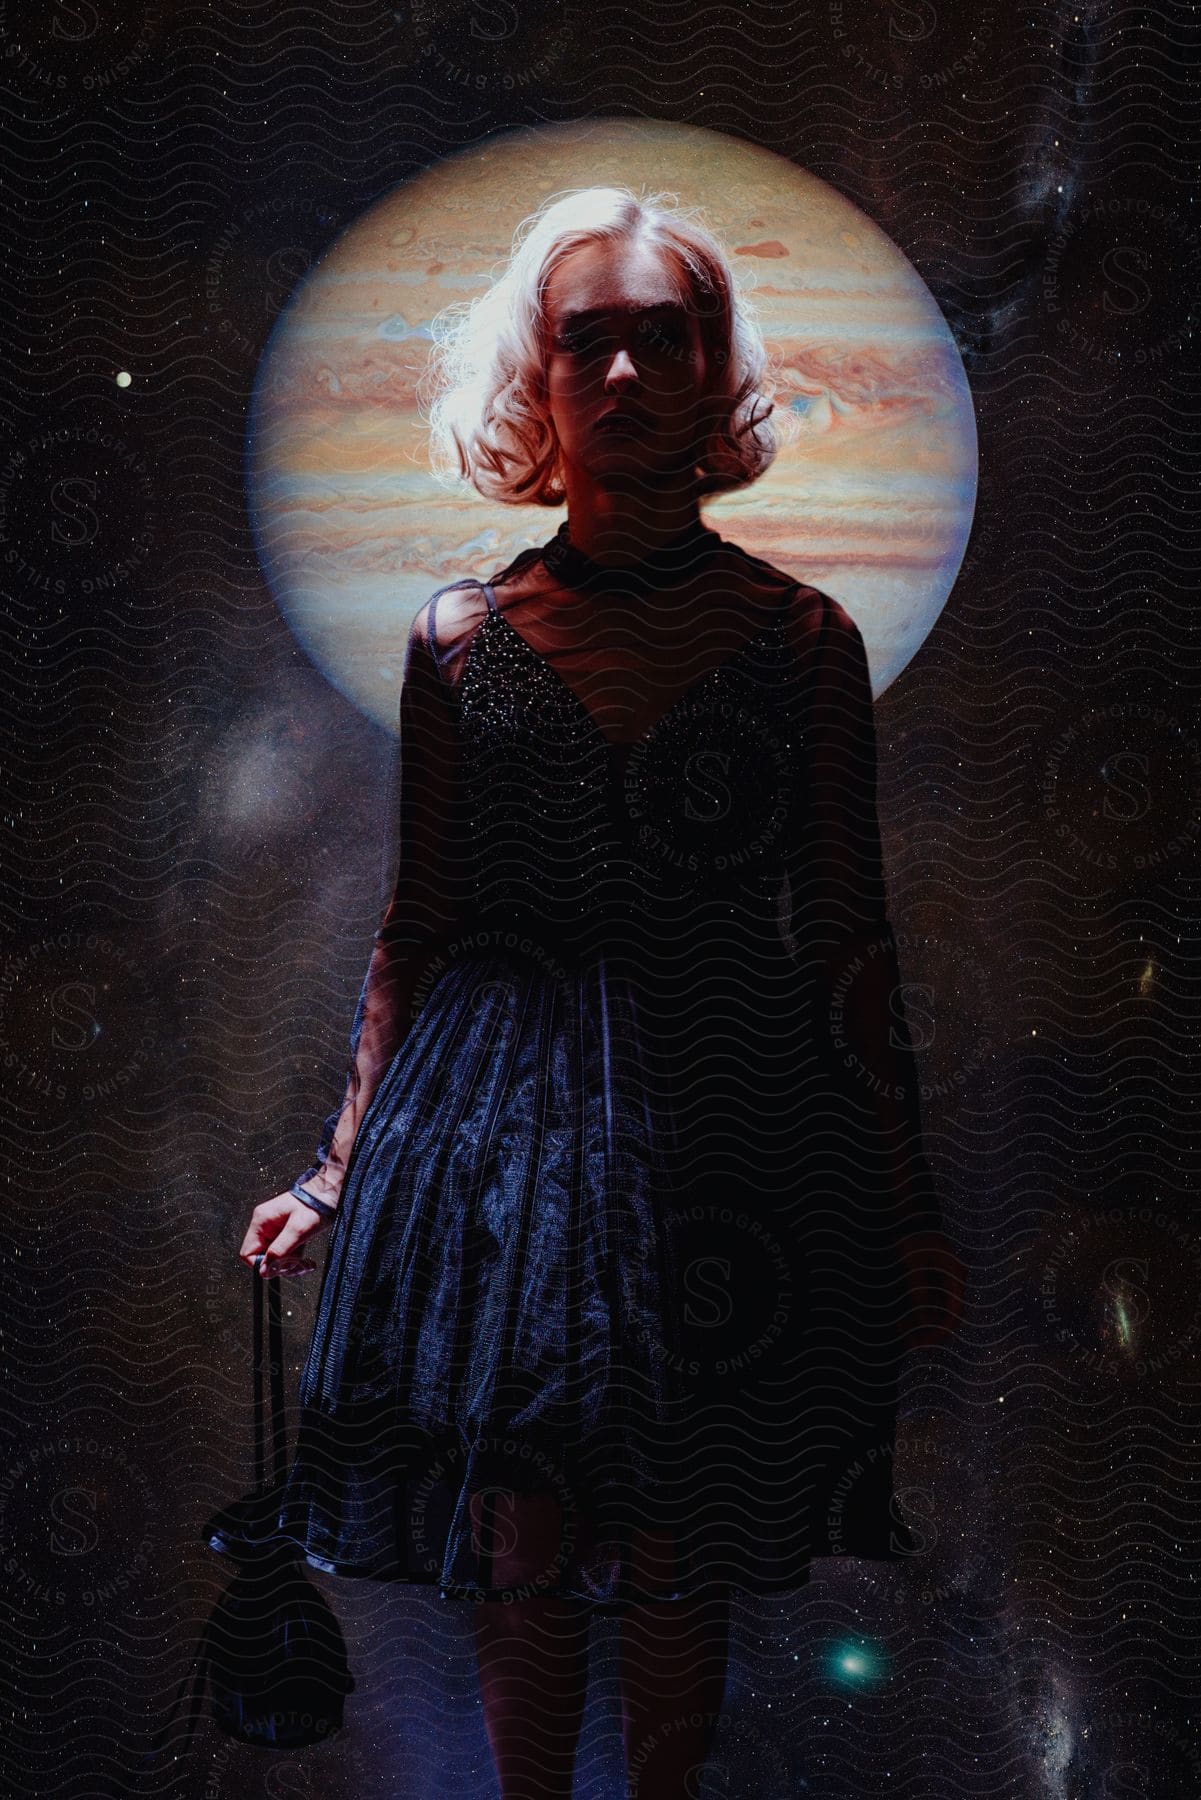 A woman in a blue dress stands in front of a black background with stars and a bright planet.